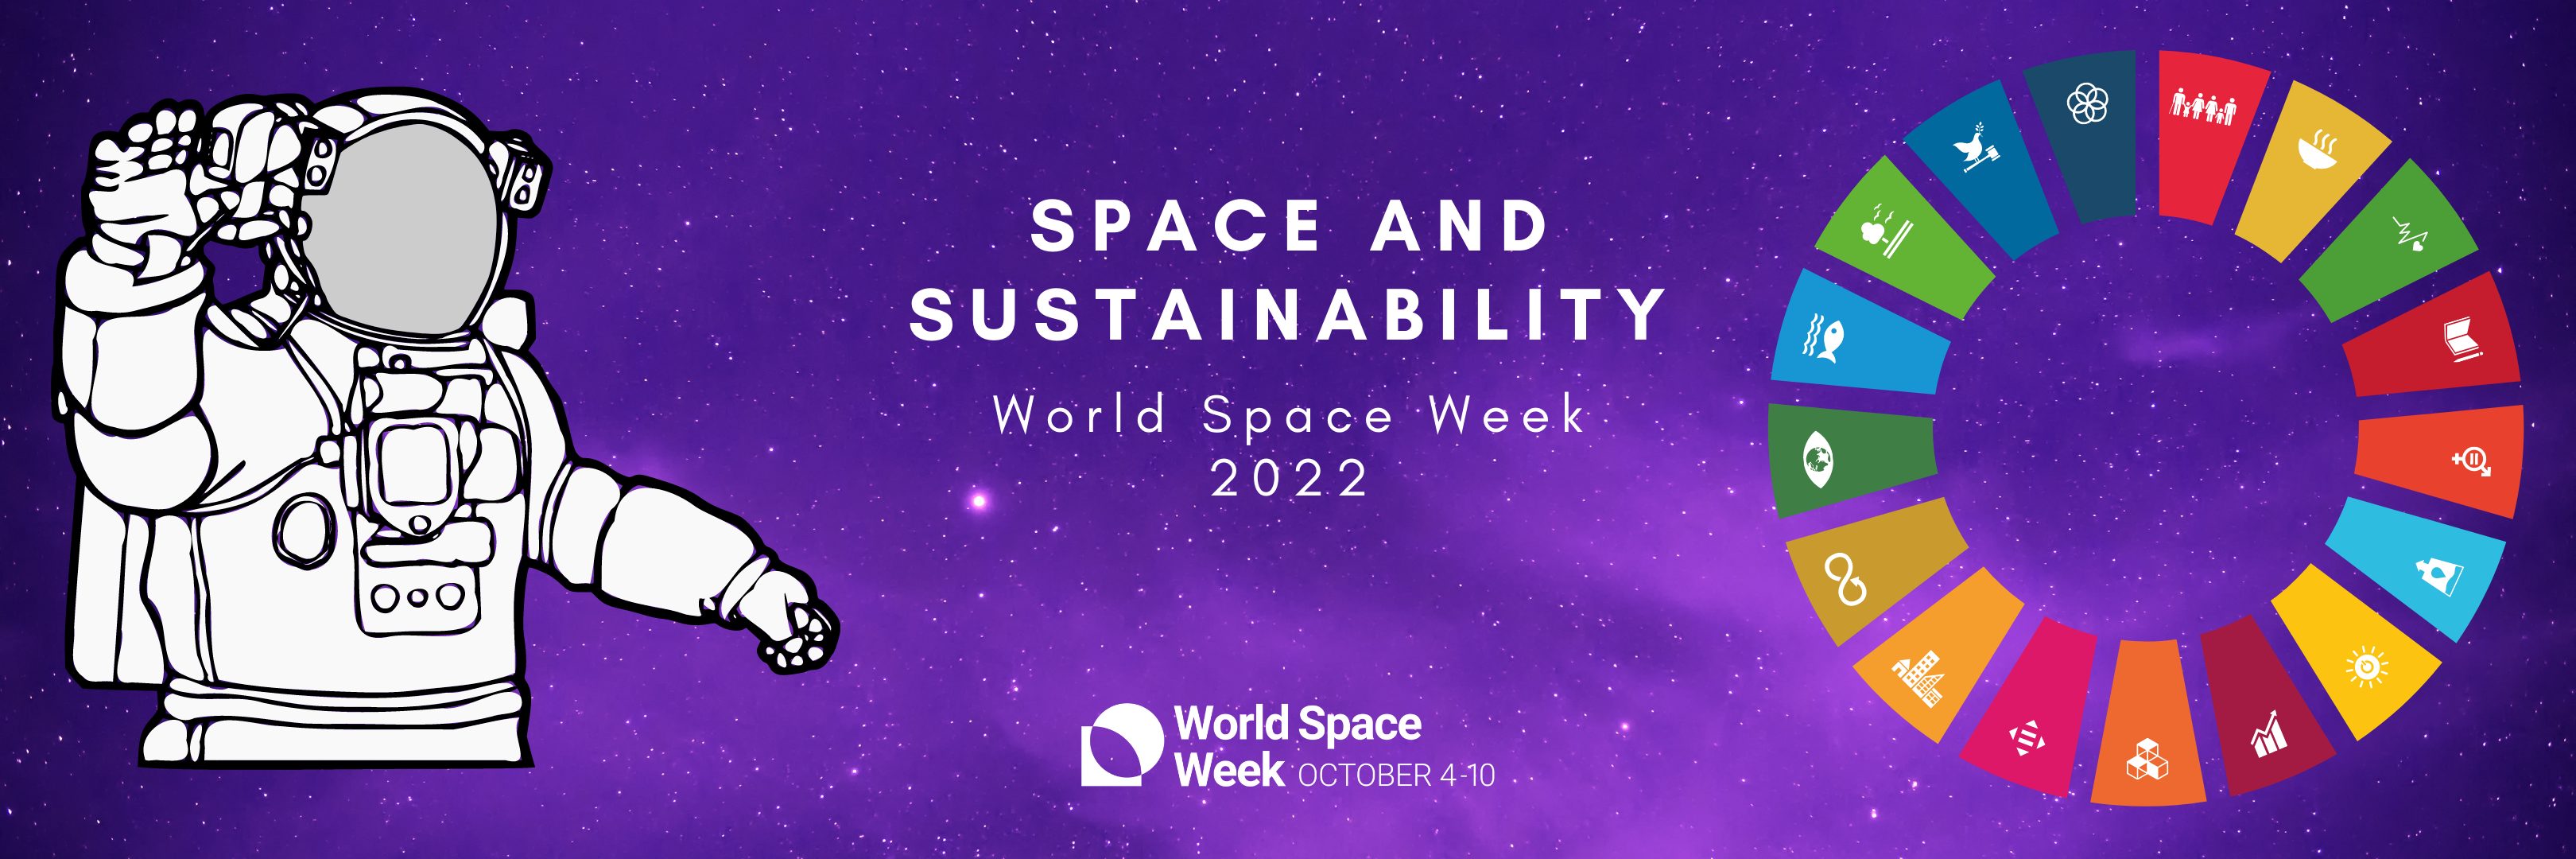 Space-and-Sustainability-website-1-1